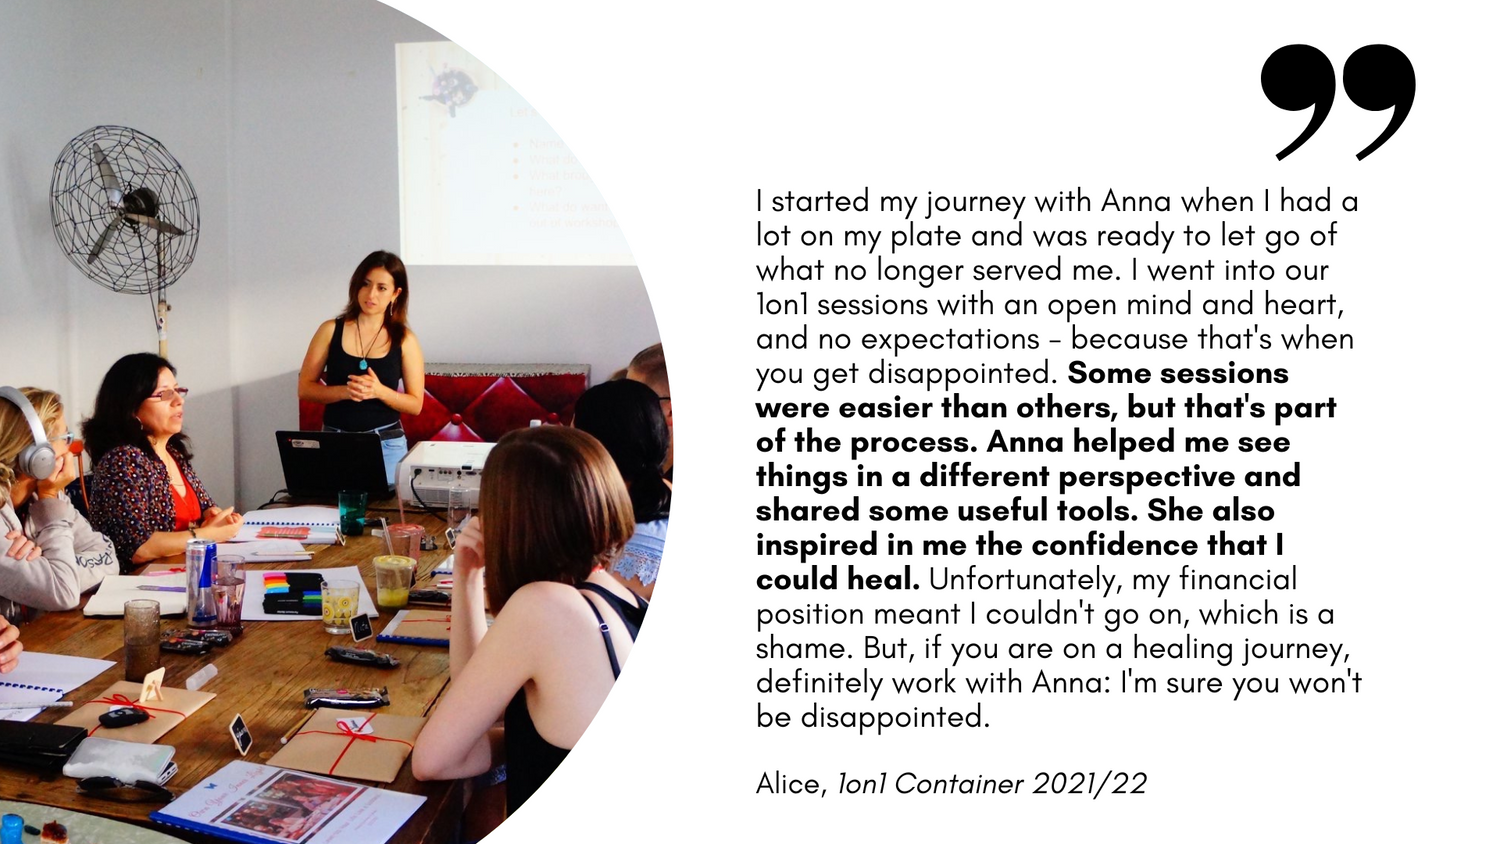 Alice's review on working with Anna Krjatian's in her 1on1 coaching container with an image of Anna standing at the head of the table where a group of people sit and listen as one person speaks.